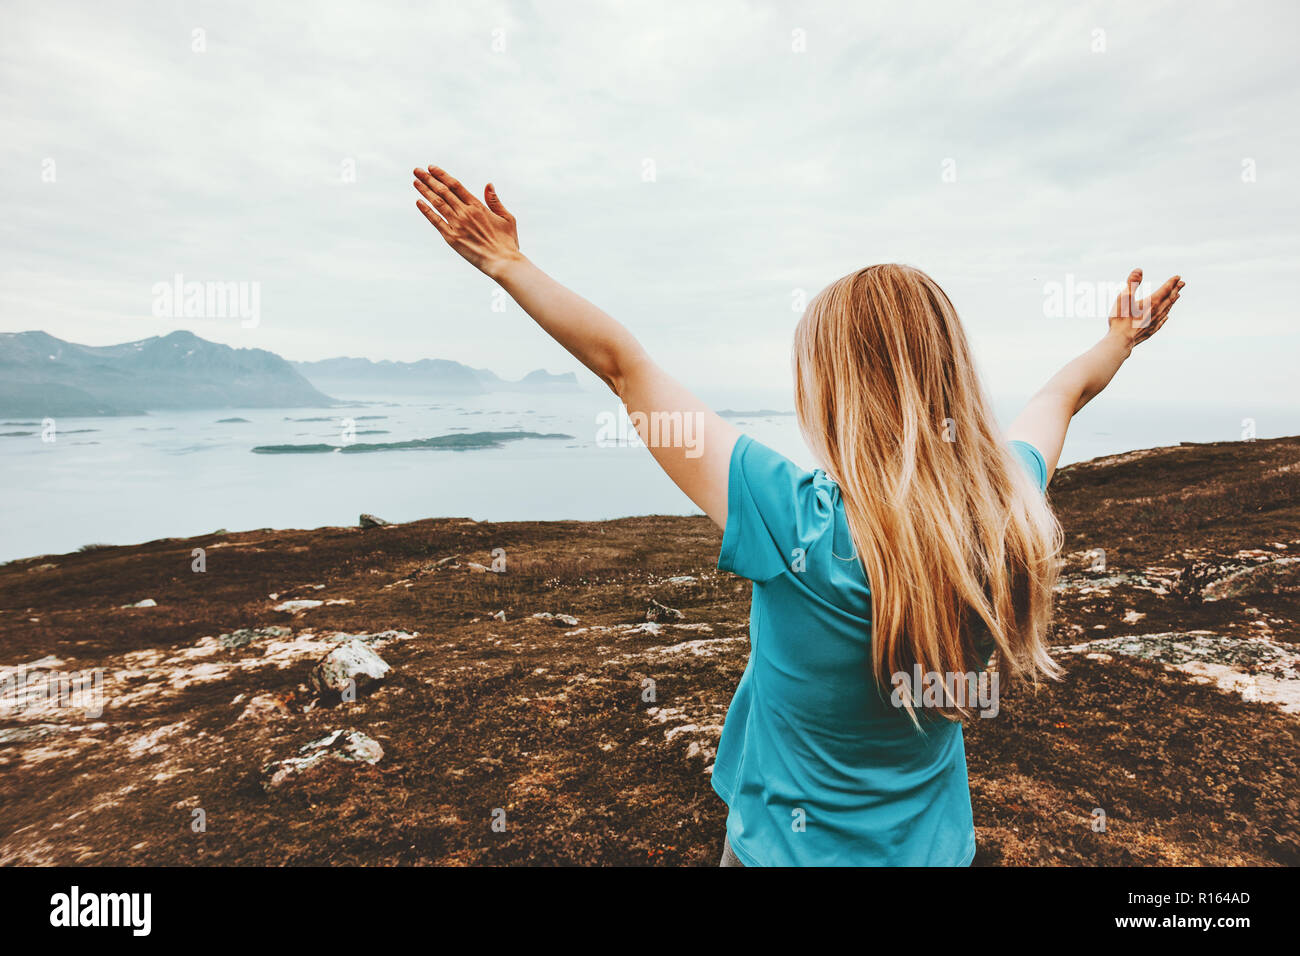 Woman raised hands enjoying landscape traveling in mountains healthy lifestyle adventure vacations outdoor success positive emotions blonde girl Stock Photo